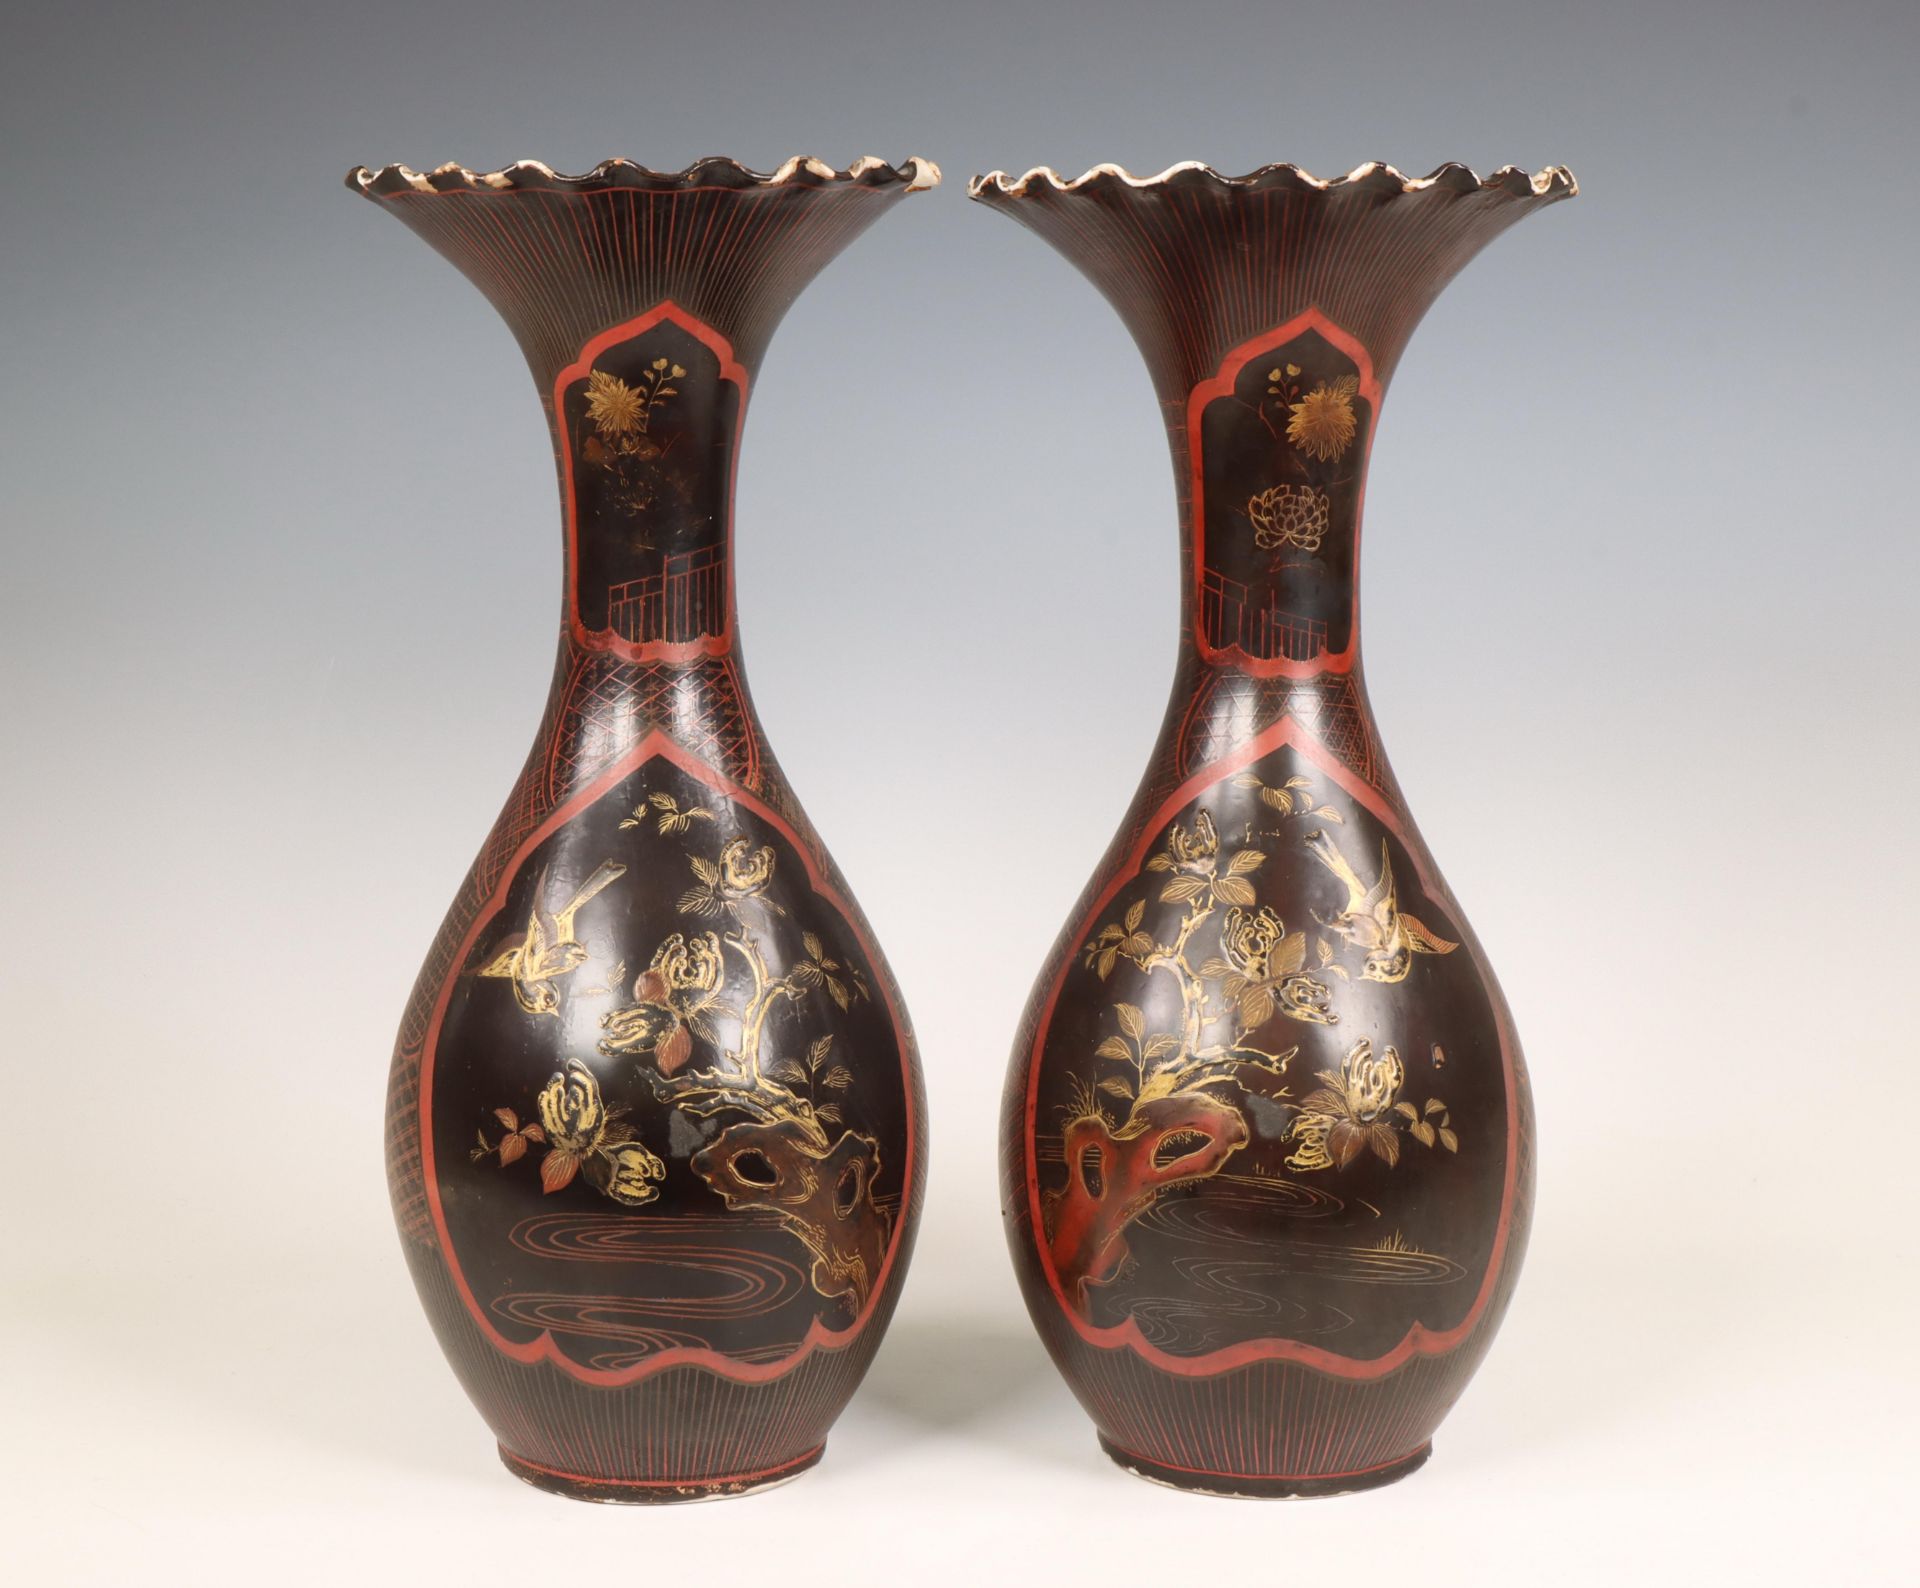 Japan, a pair of lacquer decorated porcelain vases, Meiji period (1868-1912),